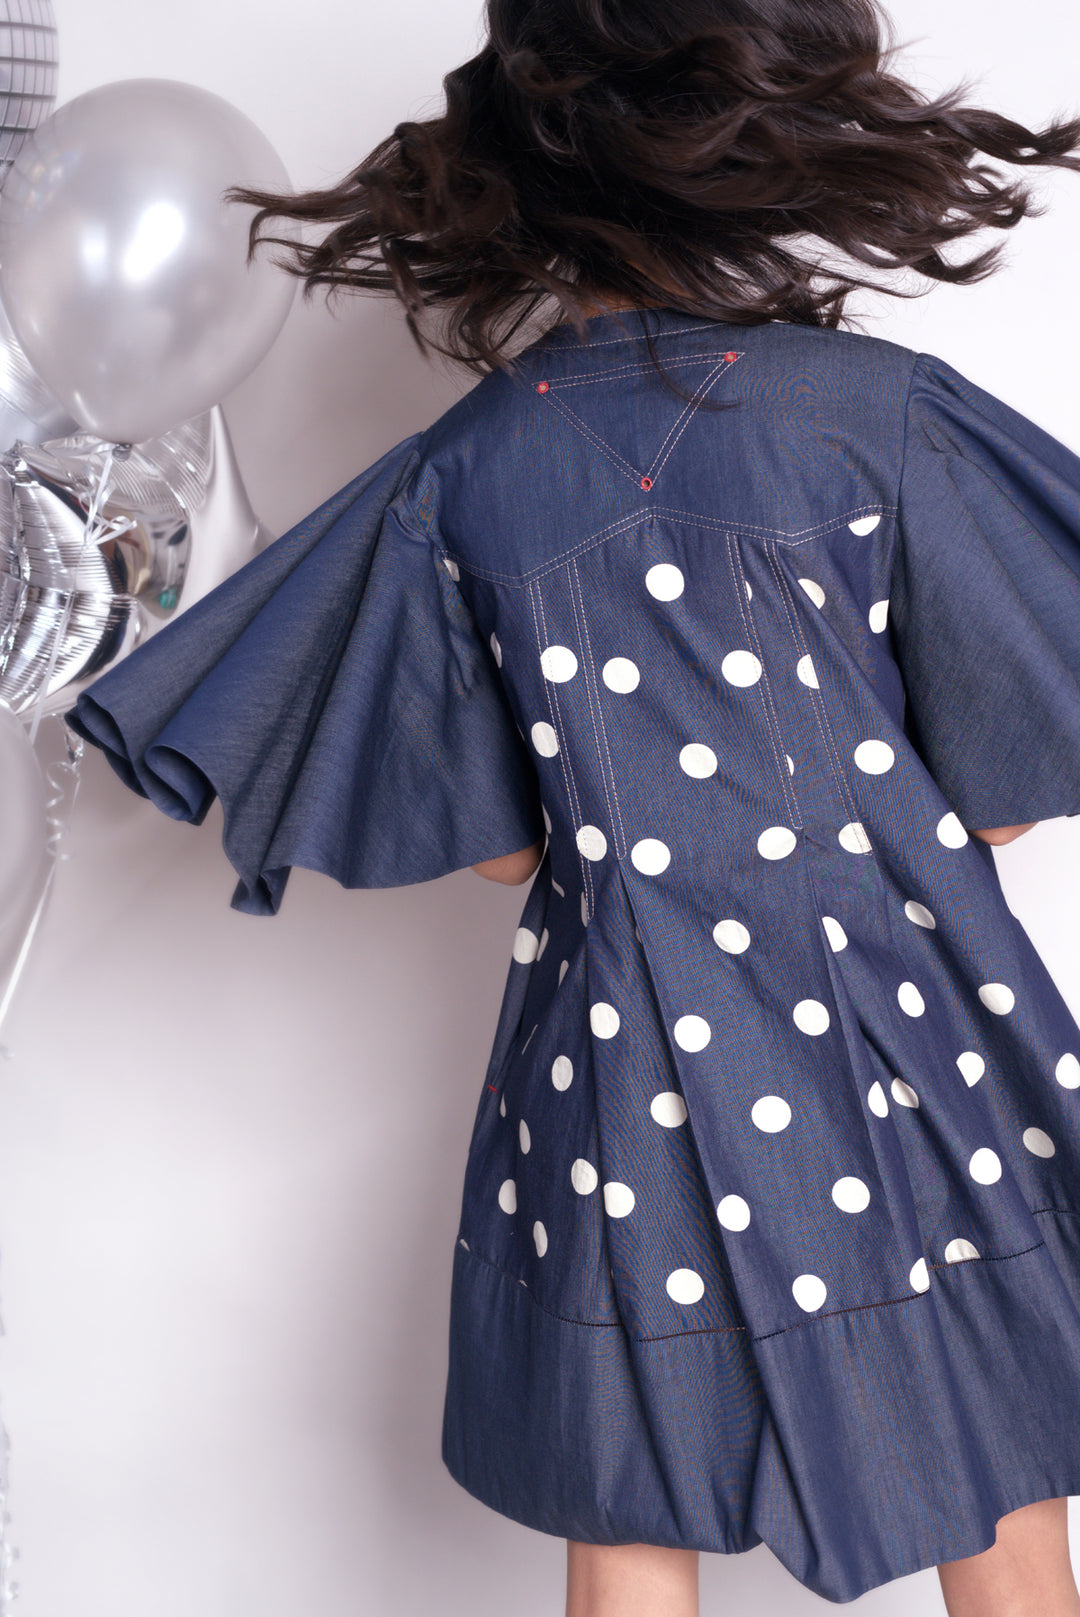 Short anti-fit dress with exaggerated flared sleeves in polka dots denim